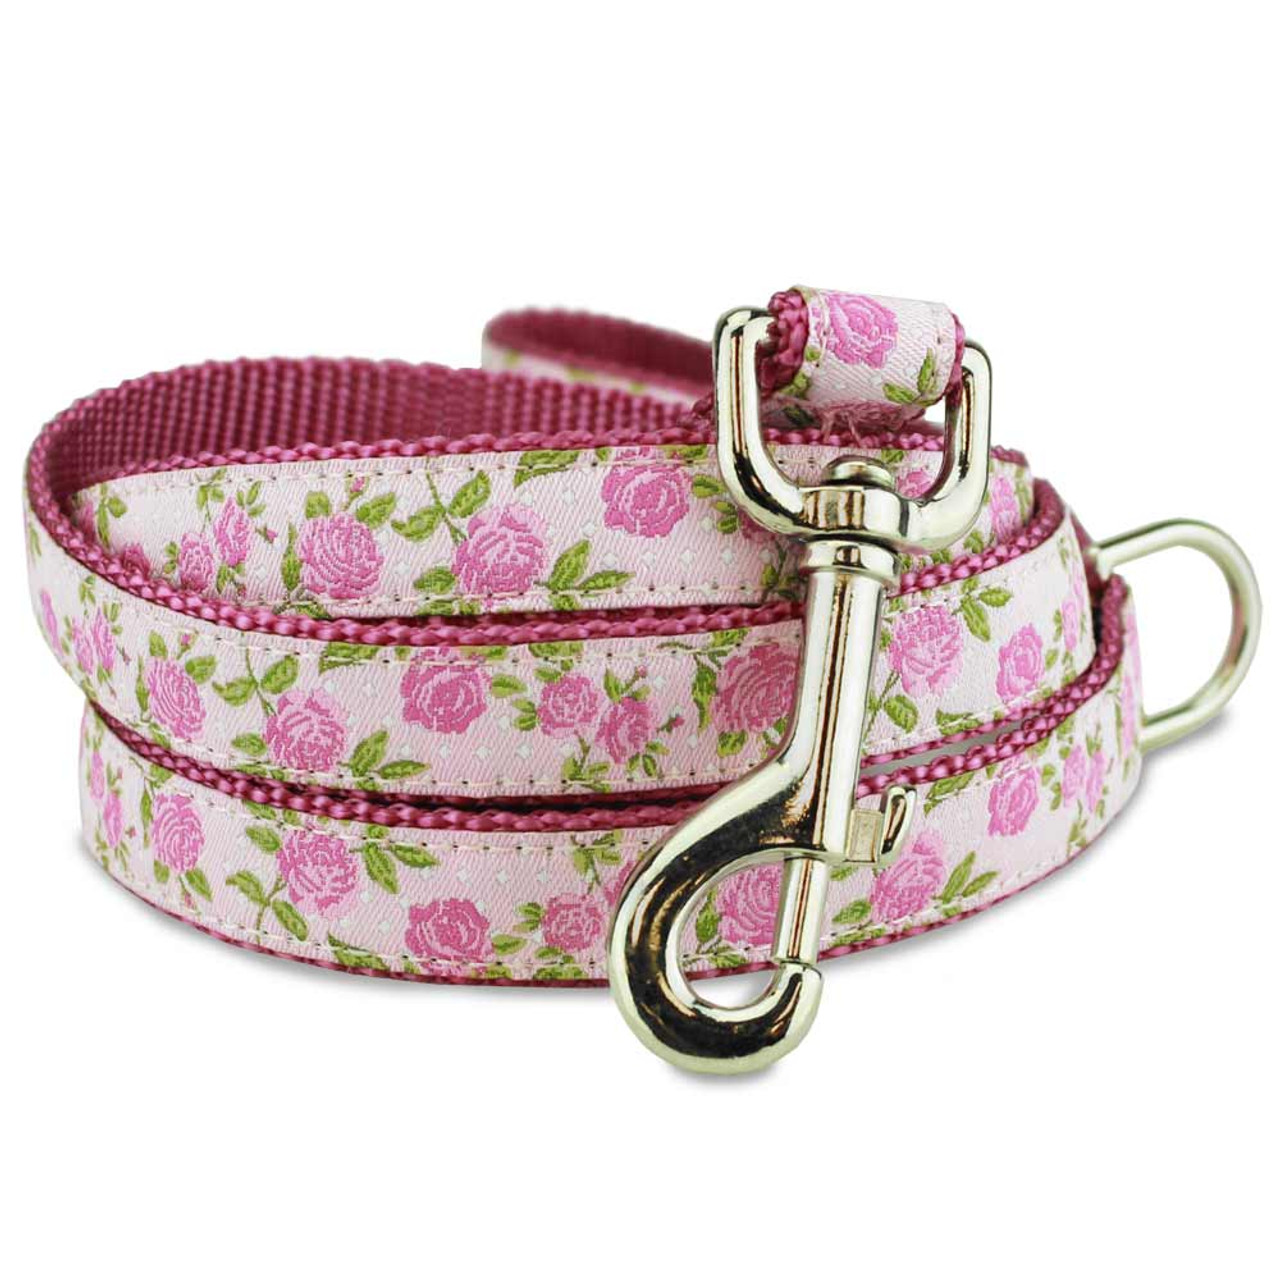 Pink Floral Dog Leash, Roses on Swiss Dots, Pink dog Lead with Flowers